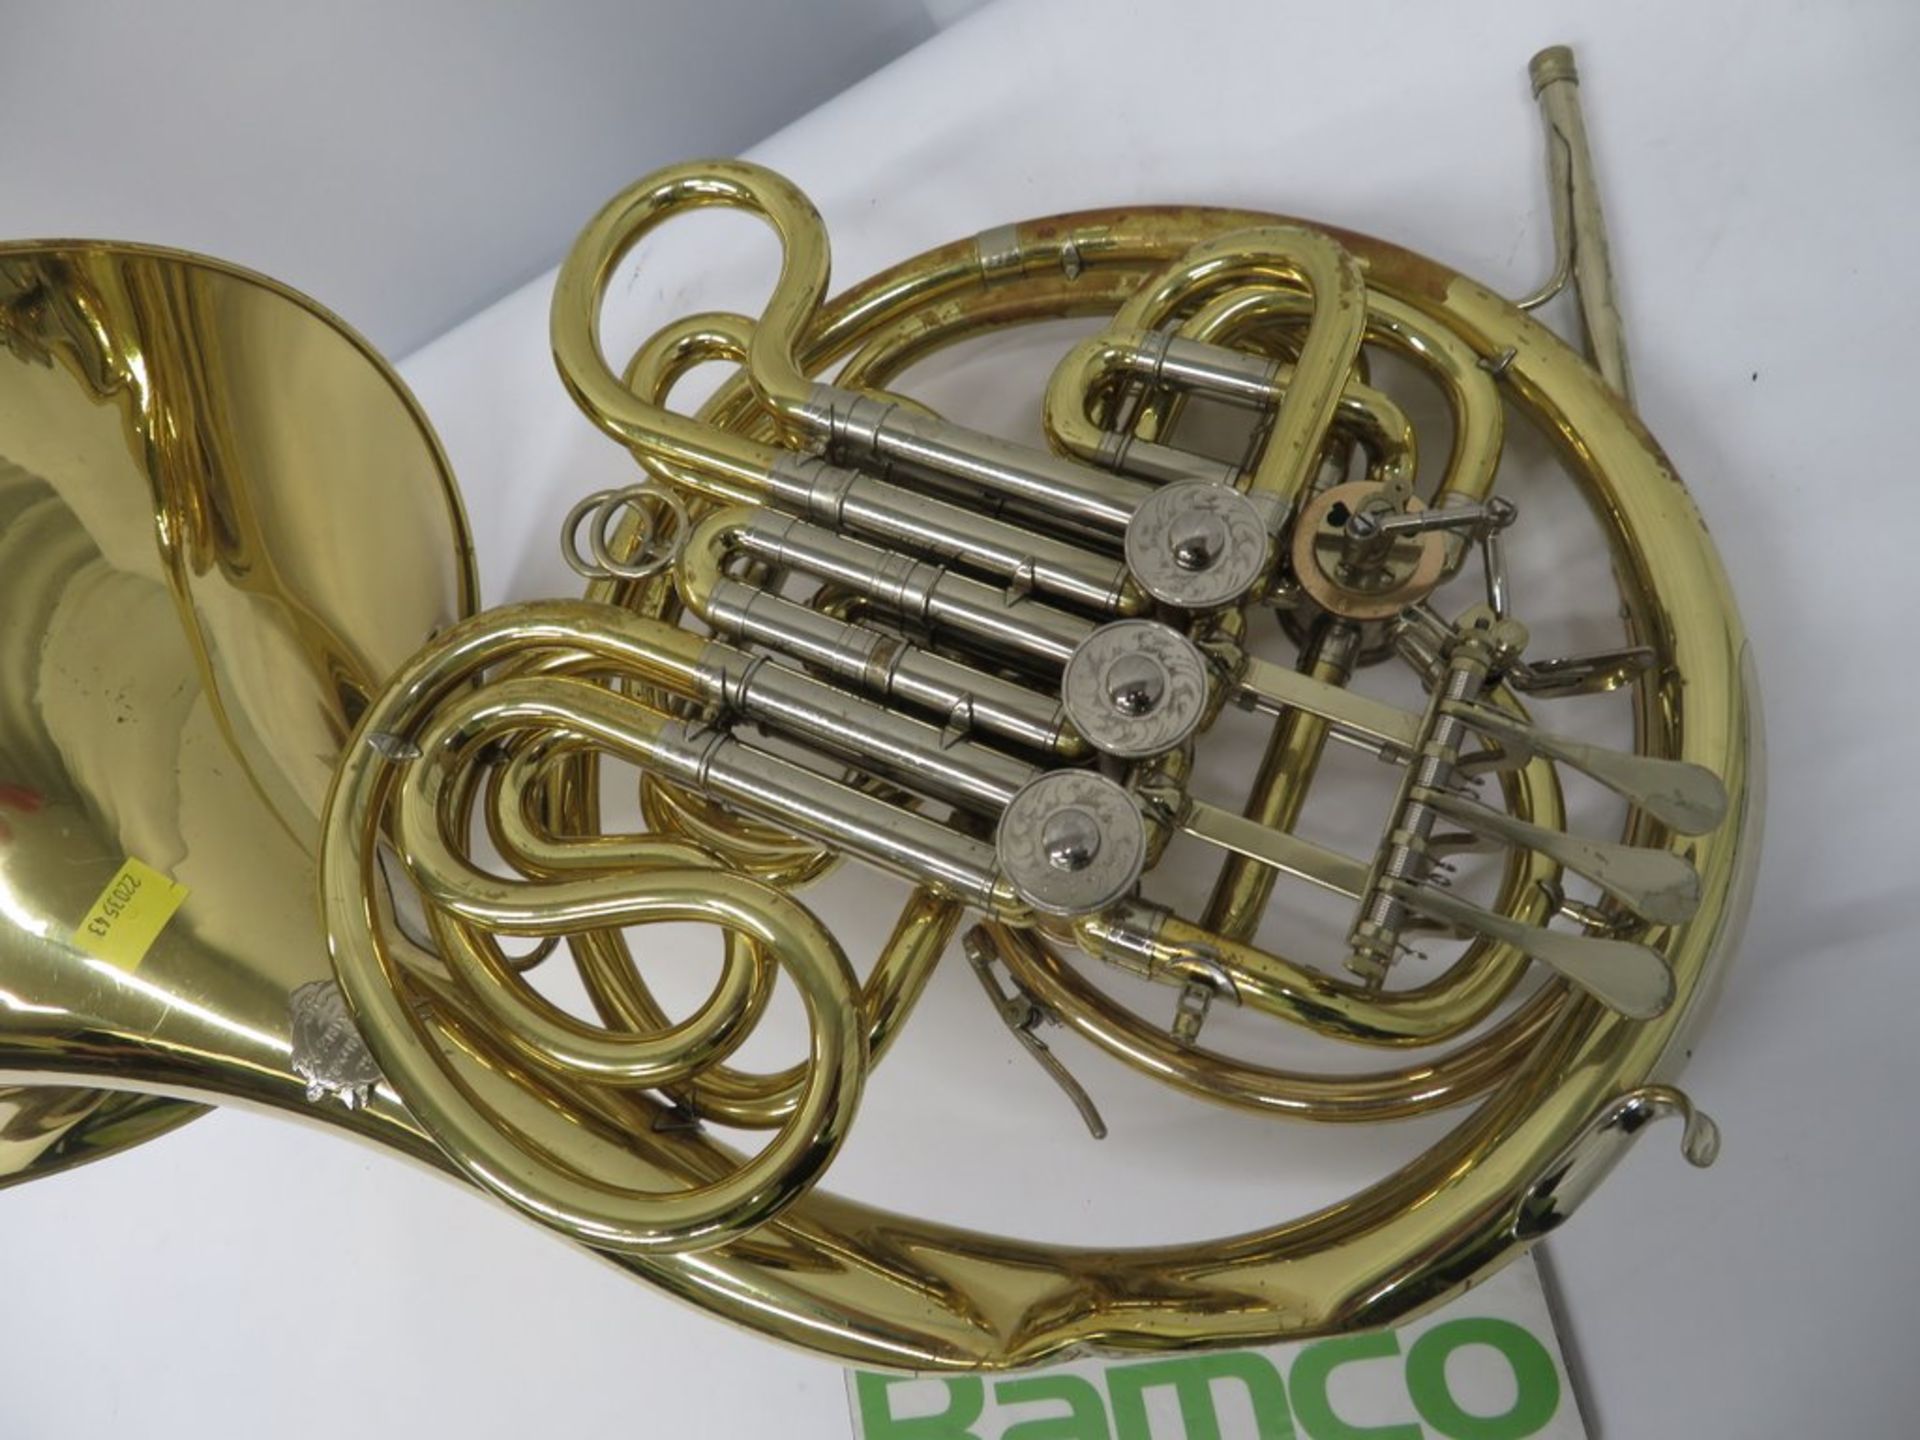 Gebr-Alexander Mainz 103 French Horn With Case. Serial Number: 17837. Please Note That Thi - Image 4 of 19